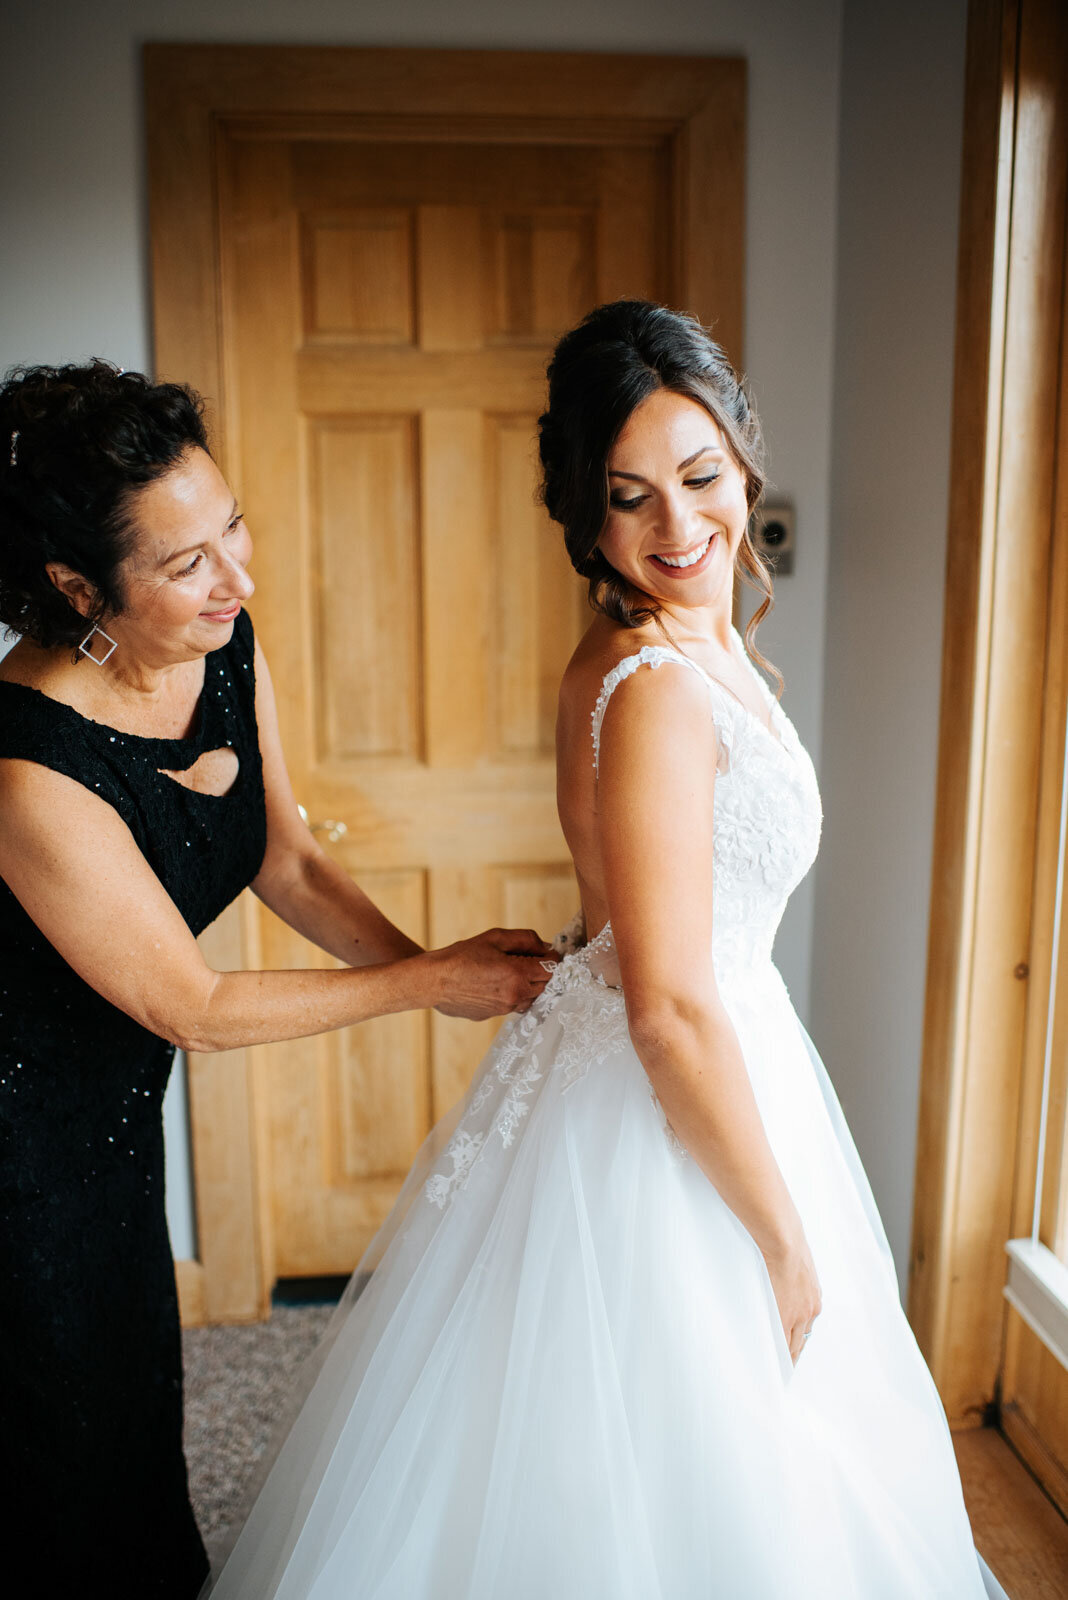 mother of the bride helping bride zip her wedding dress at mountain top inn vermont